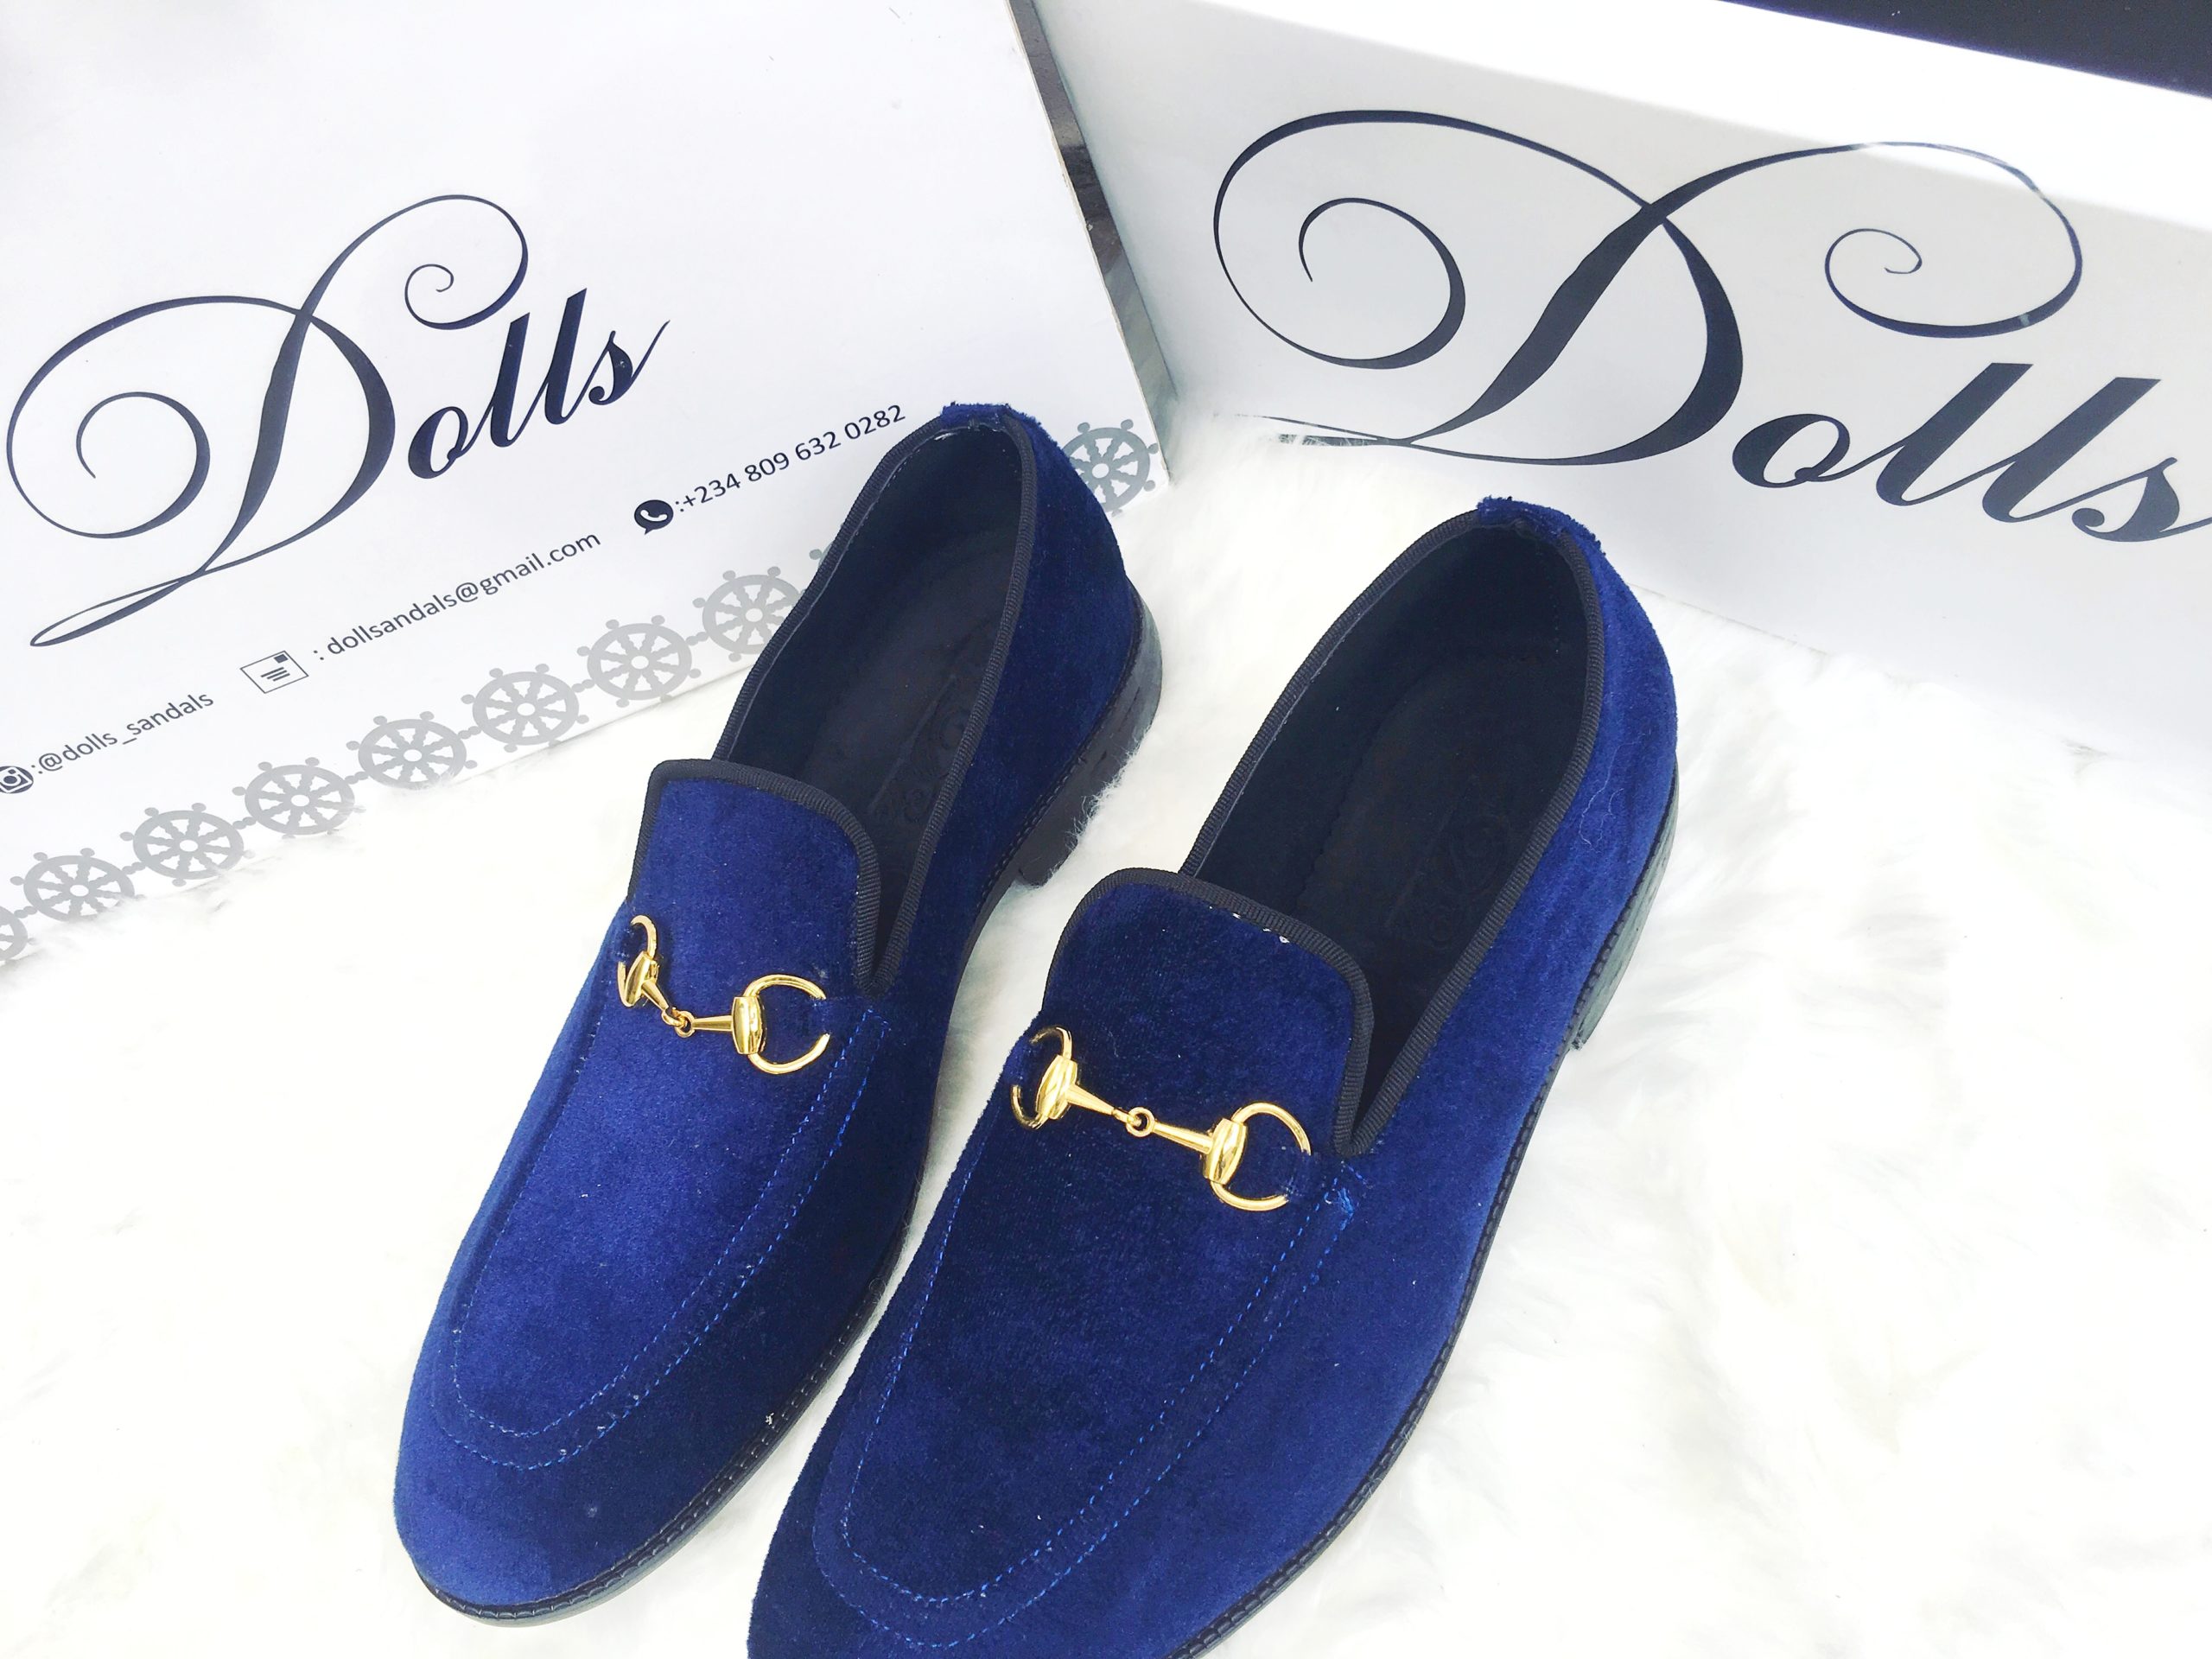 picture of a blue suede belgian loafer for men by Dolls leather products